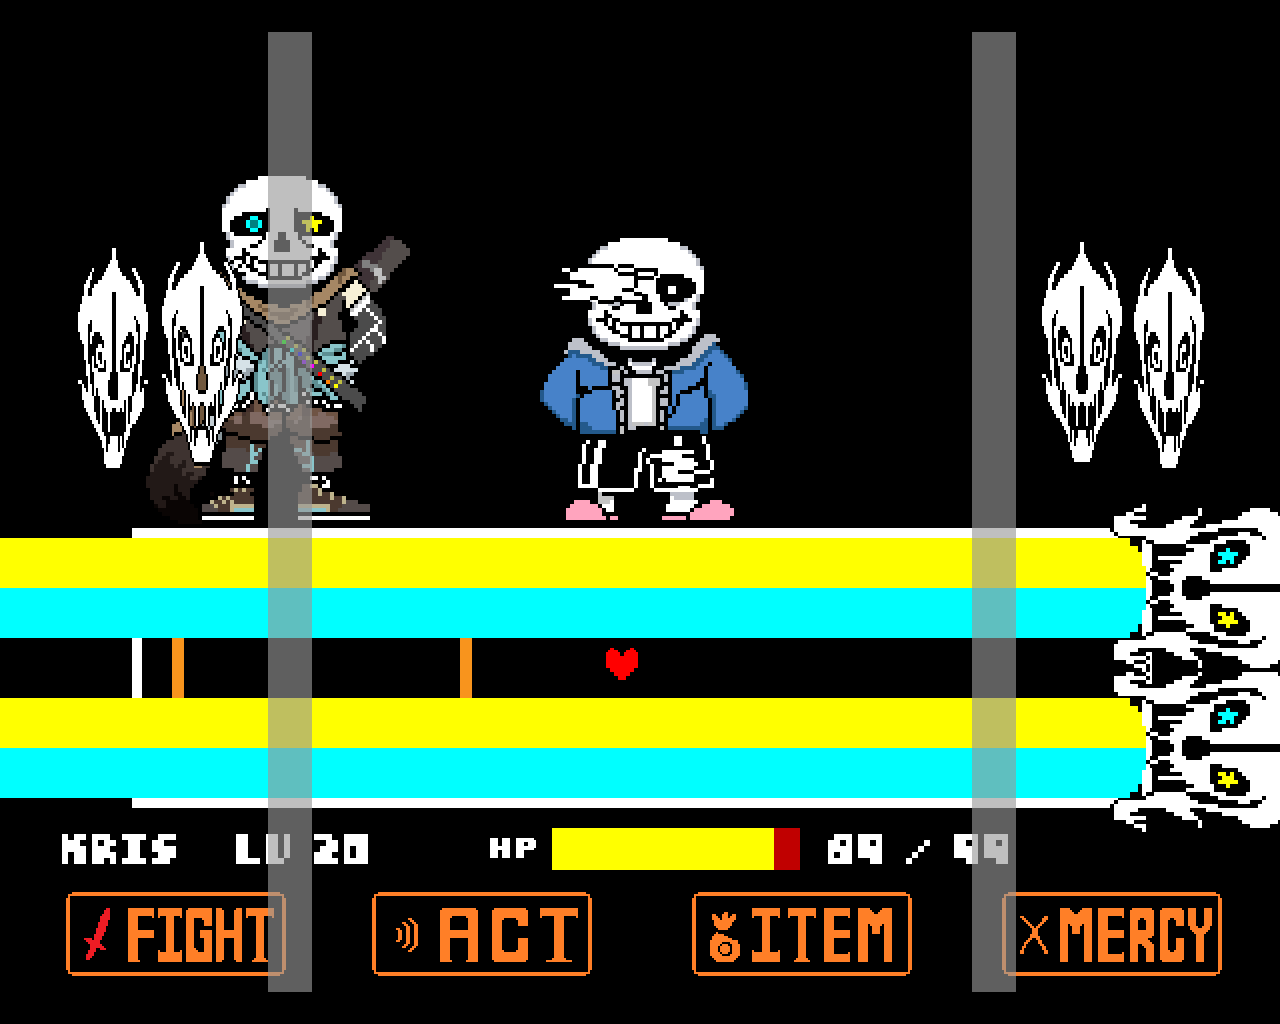 Ink Sans BOSS FIGHT 1 2 Project by Sassy Flare